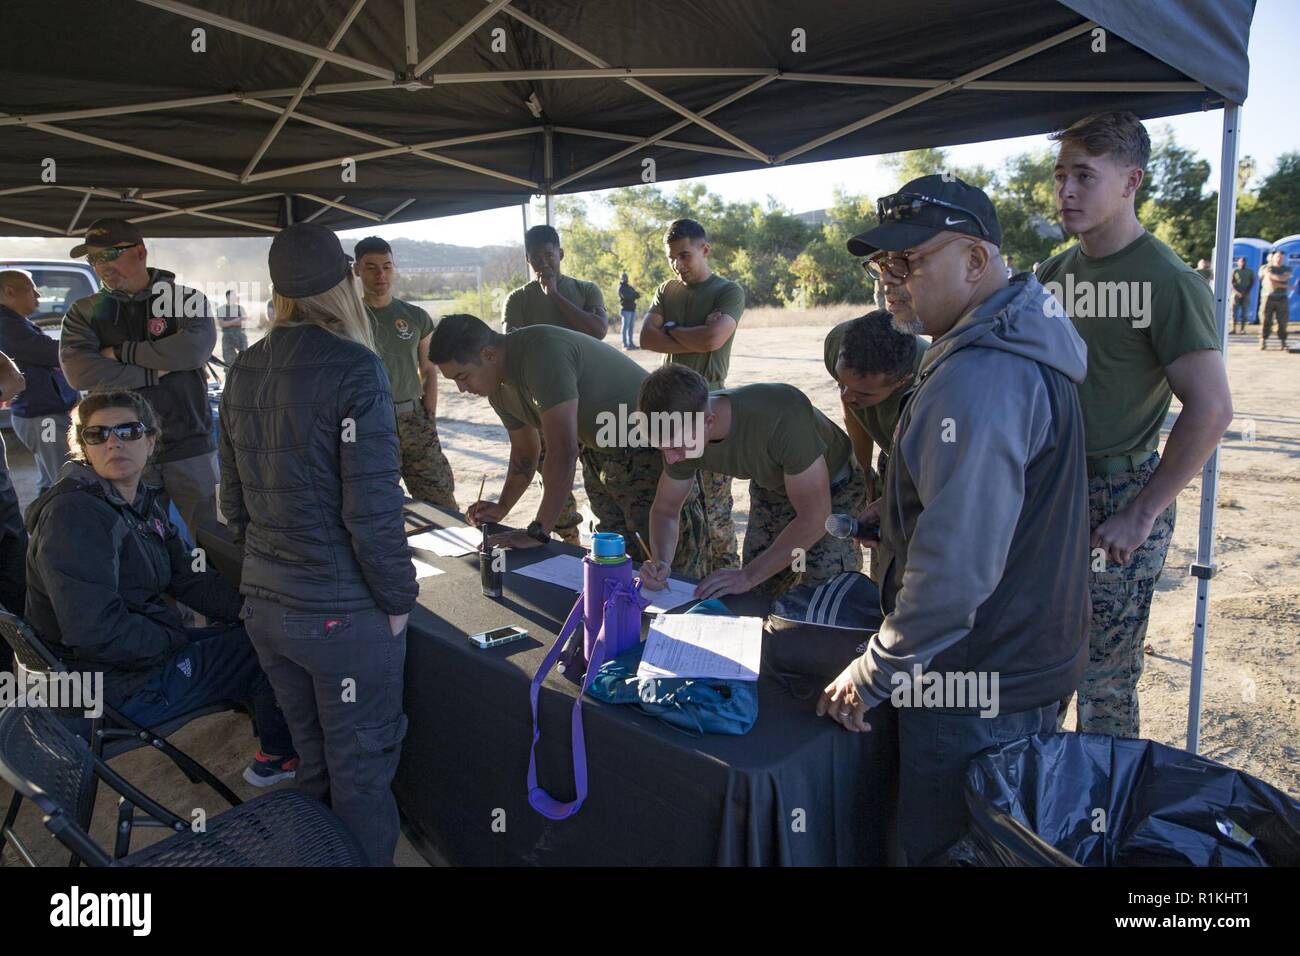 U.S. Marines register for the Fire Team Challenge, which was held as a part of the Commanding General’s Cup (CG Cup) at Lake O’Neill, Marine Corps Base Camp Pendleton, California, Oct. 17, 2018. The CG’s Cup is an intramural sports program that was developed to give service members from various units across MCB Camp Pendleton an opportunity to compete in organized sporting events in order to promote fitness, teamwork and esprit de corps. The CG’s cup also allows service members to earn points for their units, resulting in prizes and awards that are presented to the top-earning units at the con Stock Photo